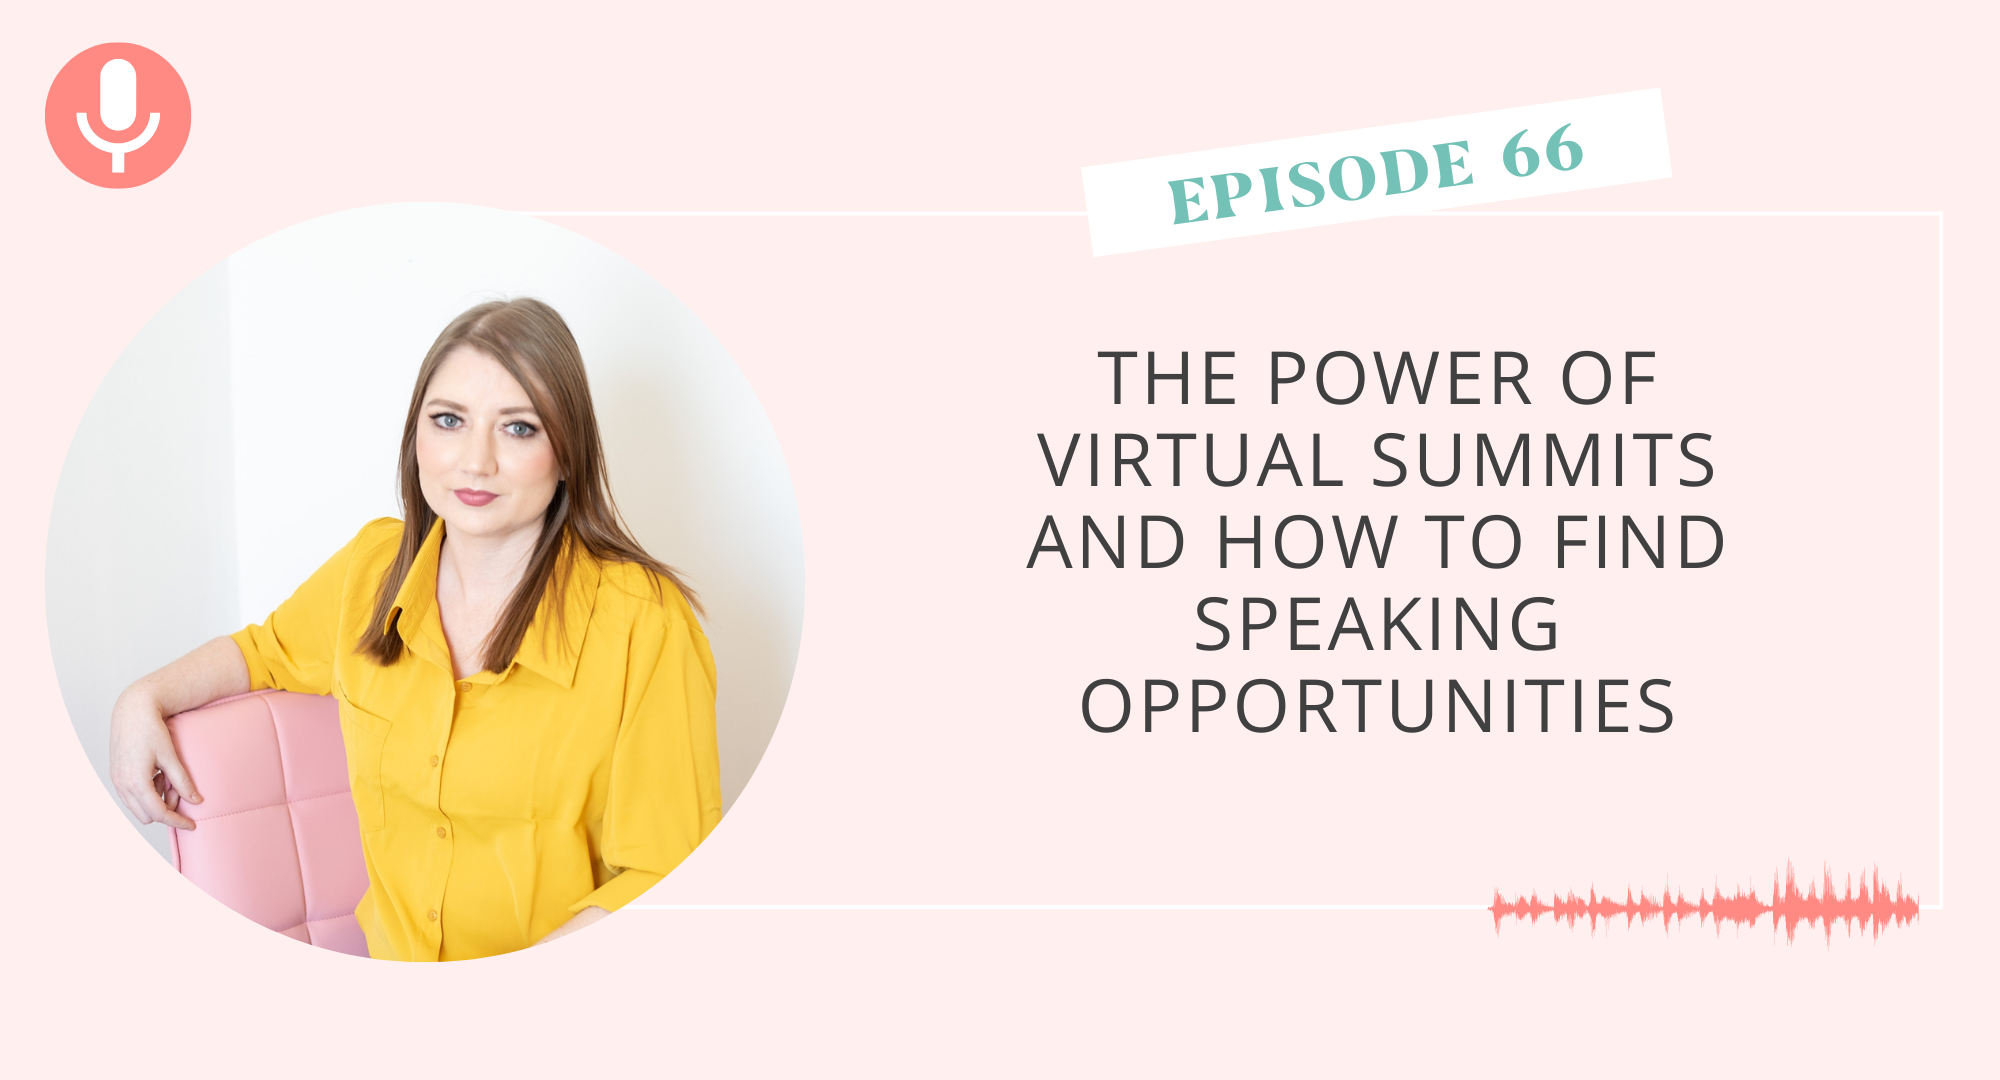 The Power of Virtual Summits and How to Find Speaking Opportunities